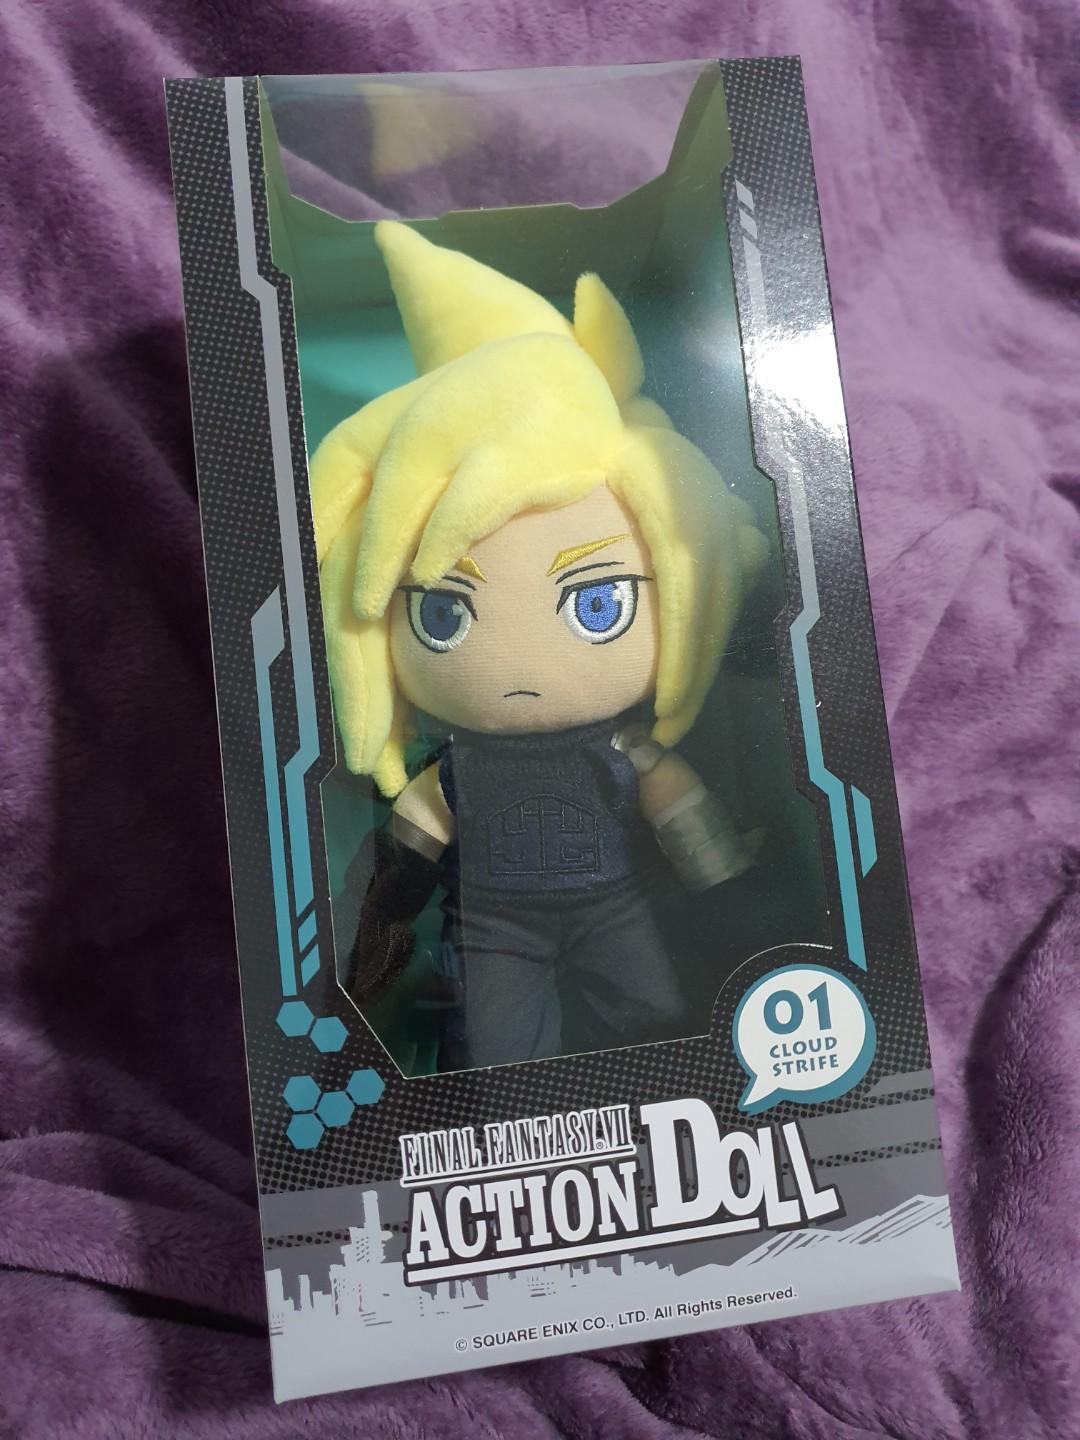 New Final Fantasy Vii Cloud Strife Action Doll Plush